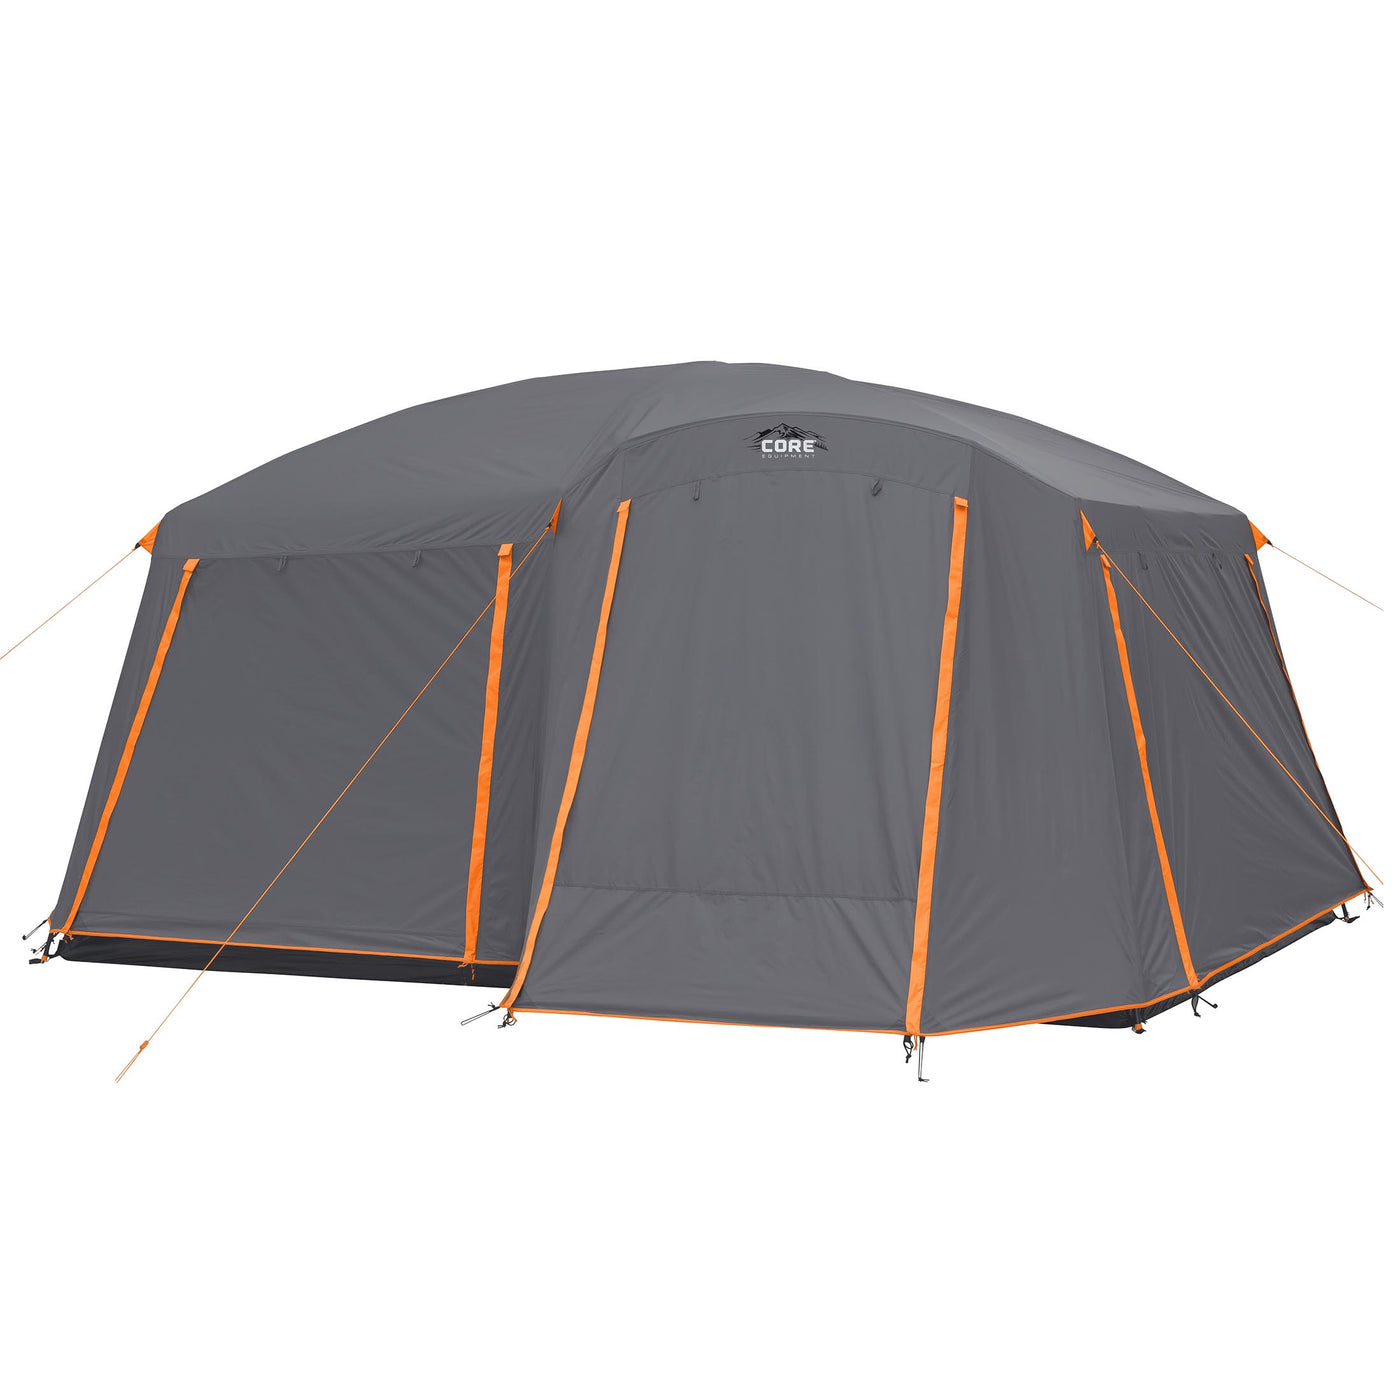 I Tested the 6 BEST 10-Person Tents (Coleman, Core + More) 